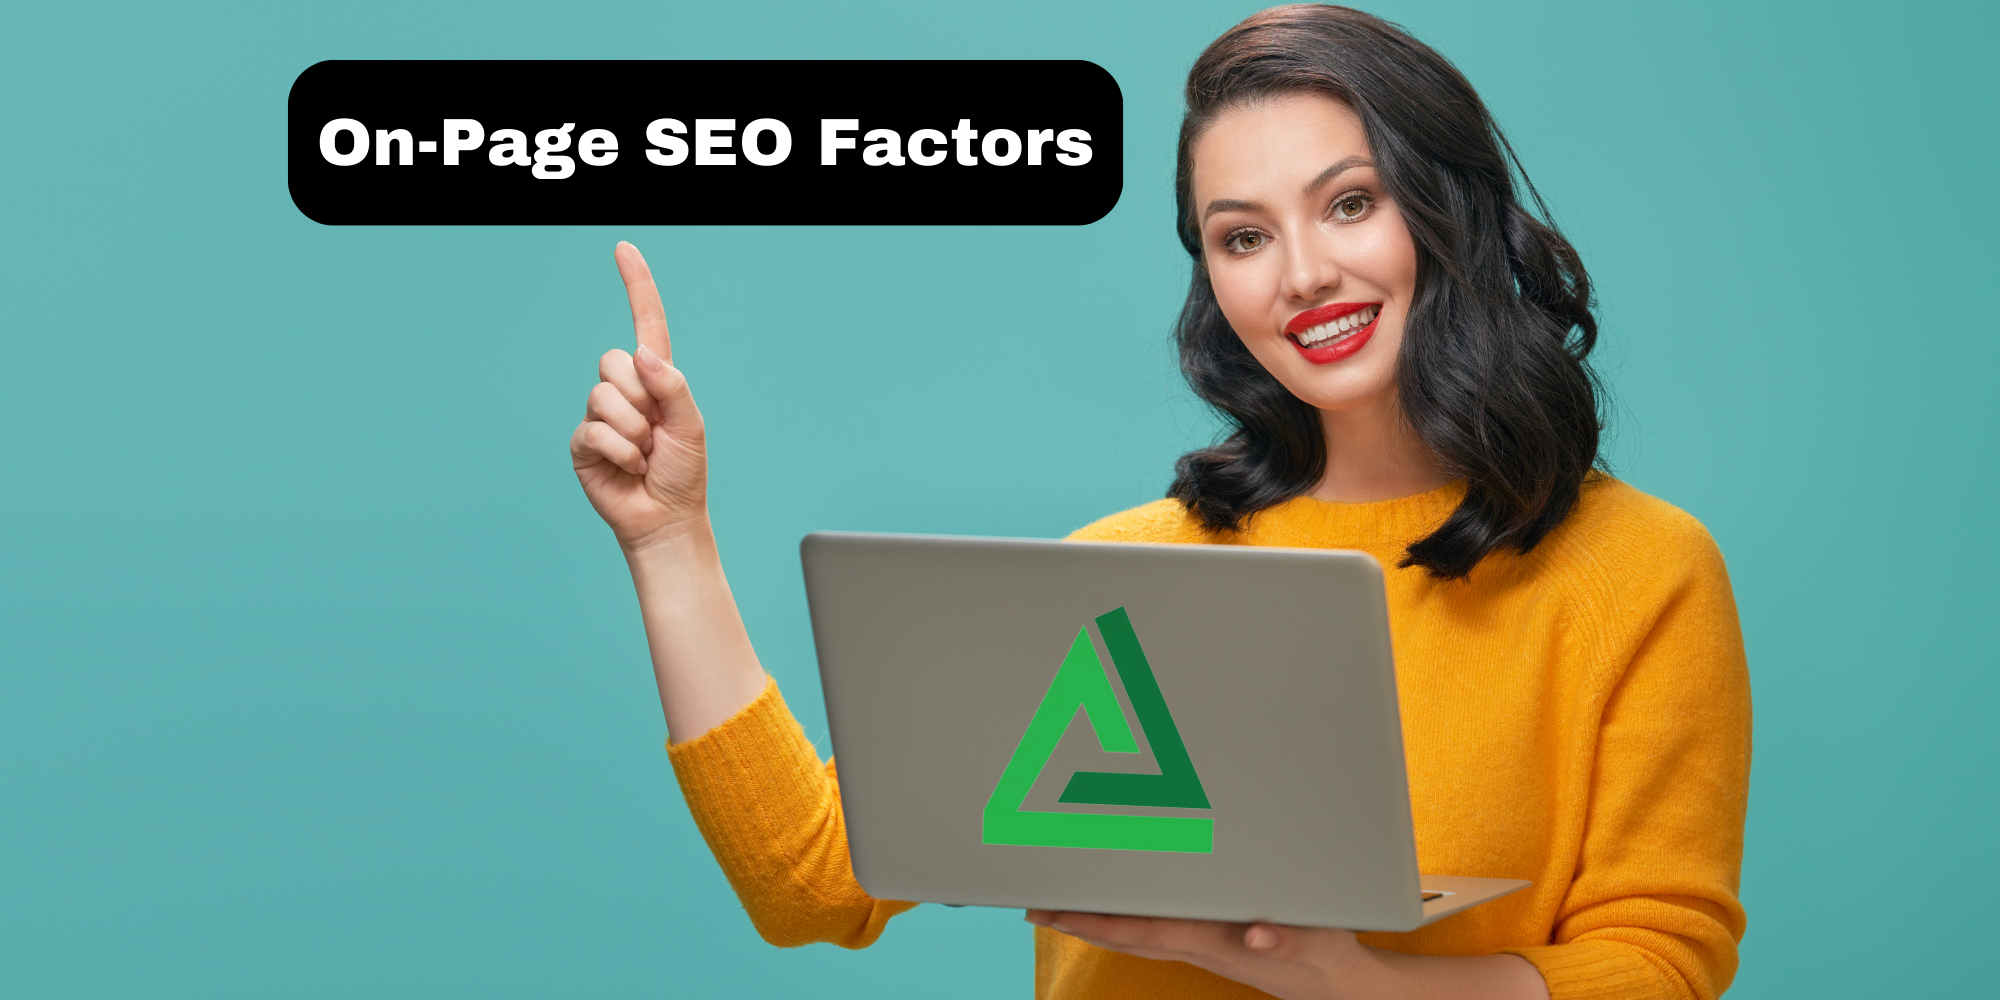 On-Page SEO factors feature